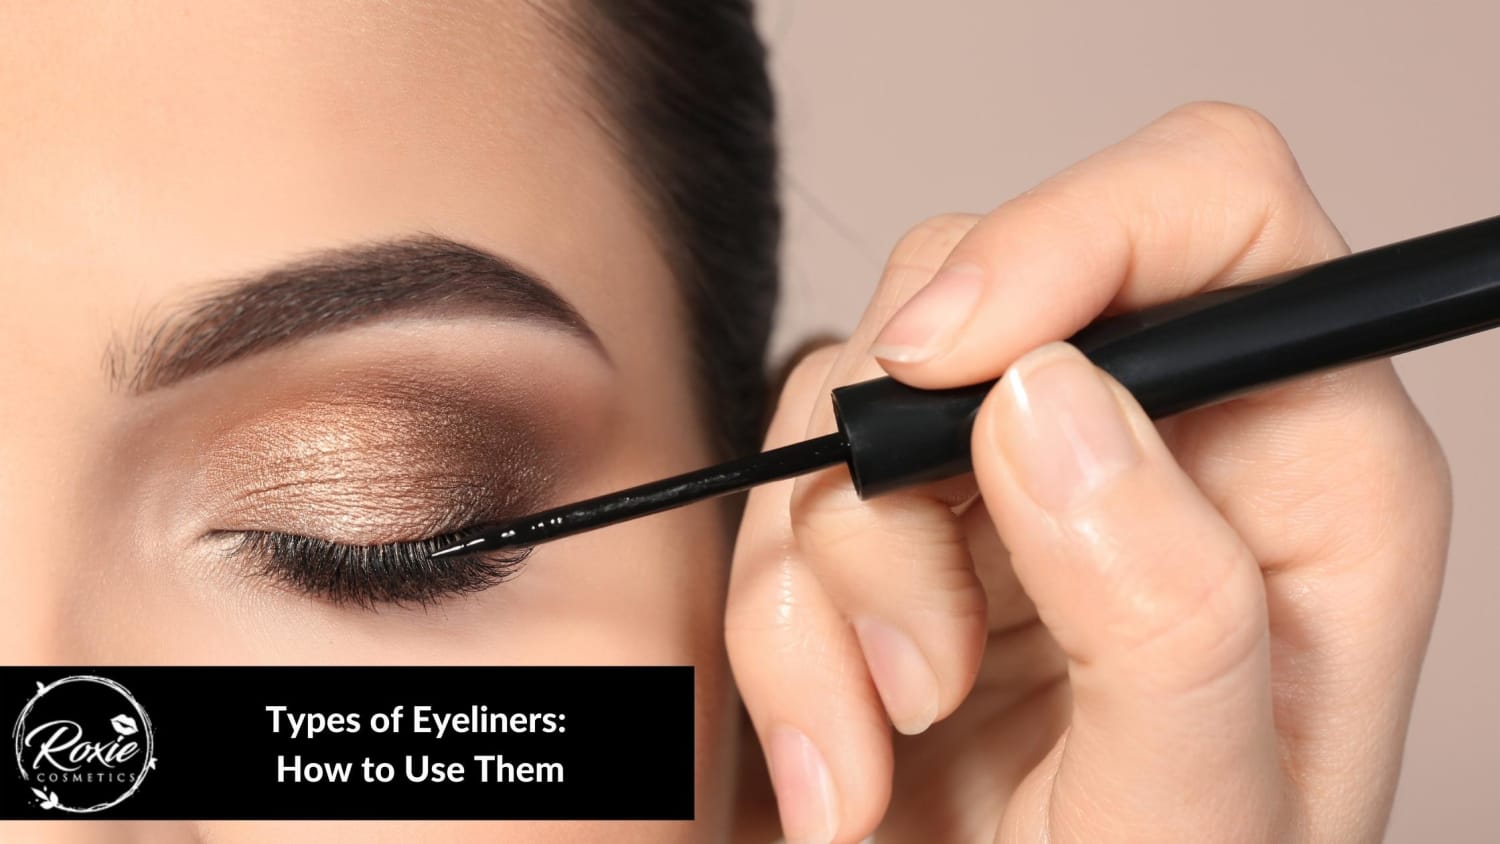 Types of Eyeliners: How to Use Them